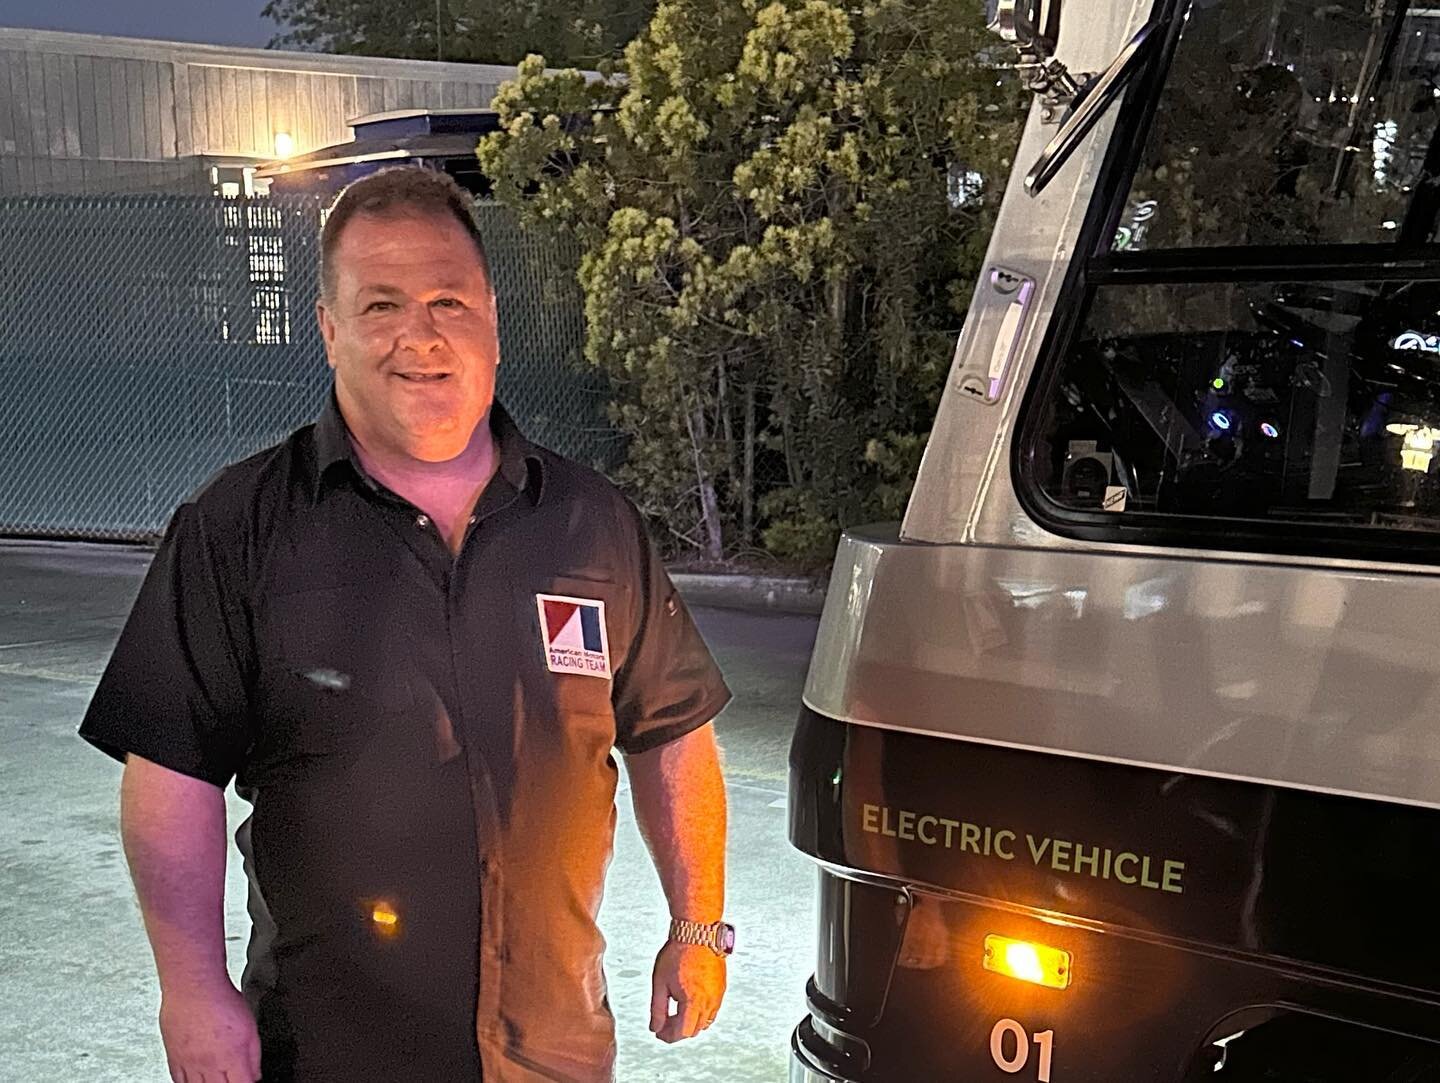 Our DC air conditioners are extremely versatile and can be used in a variety of different ways. Our owner recently took a family trip to Universal Studios, and saw the trams that were converted to electric for the studio tour ride. The tram uses 2 HD